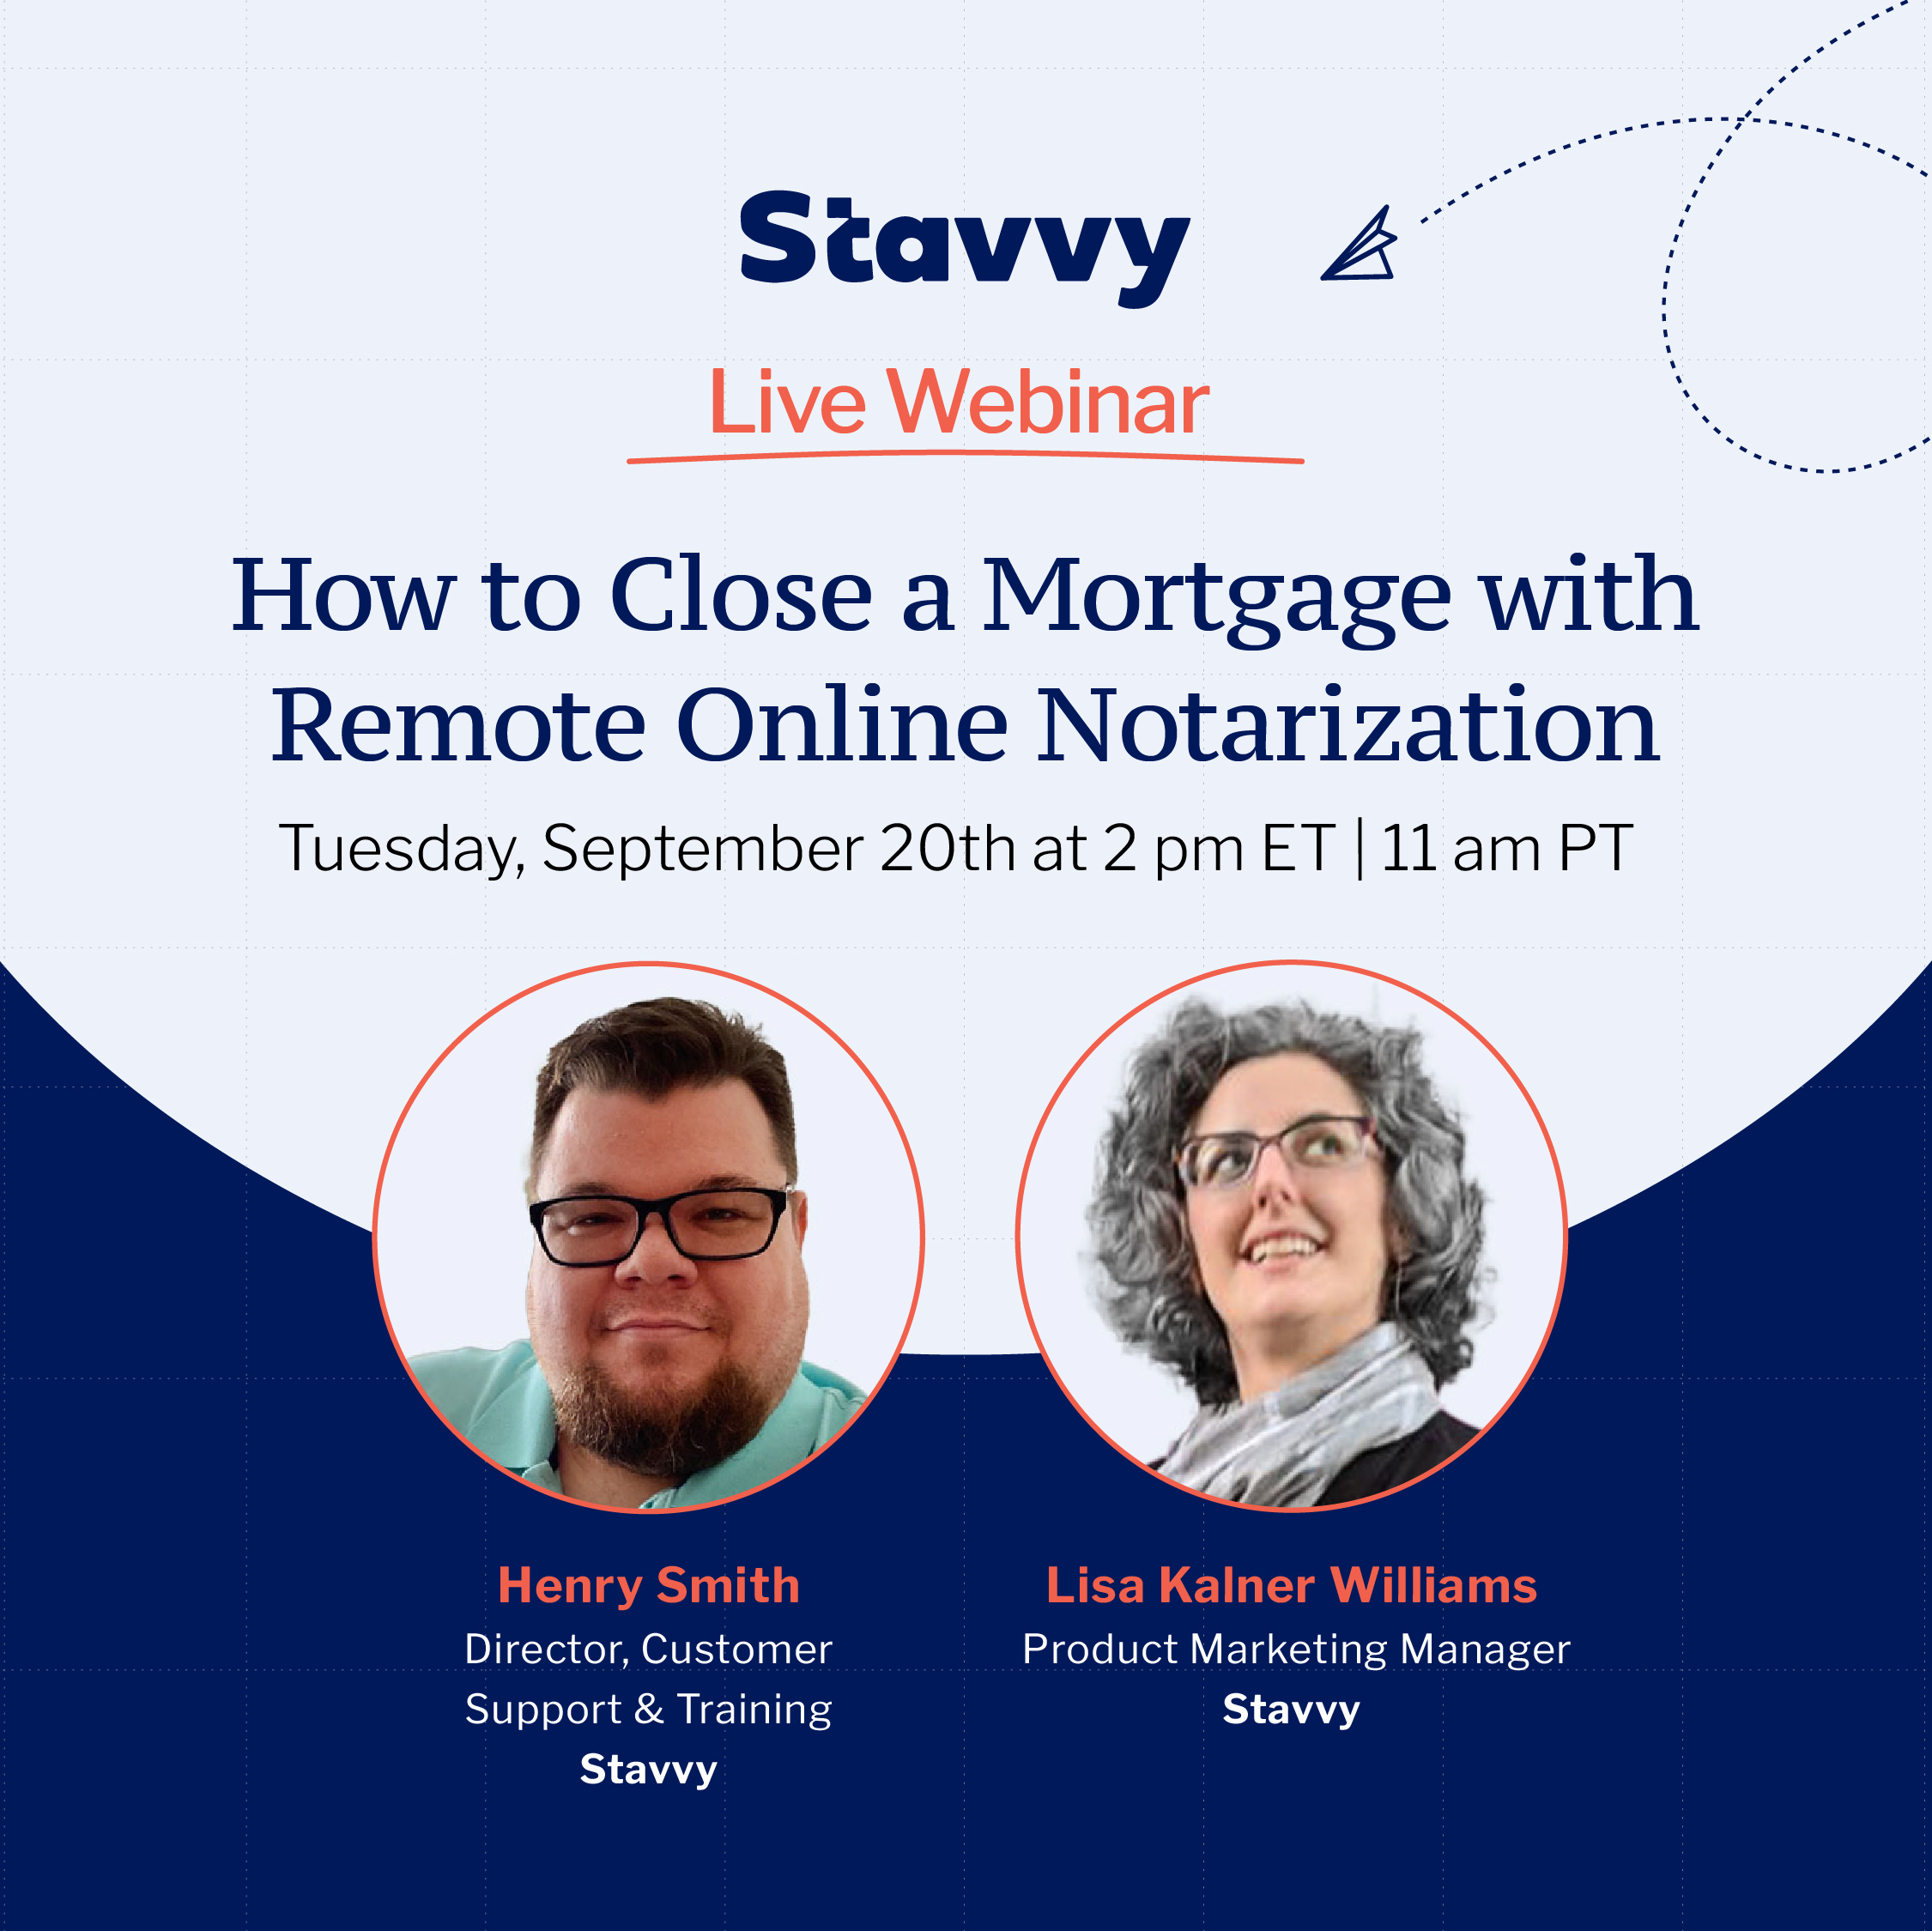 How to Close a Mortgage with Remote Online Notarization Webinar